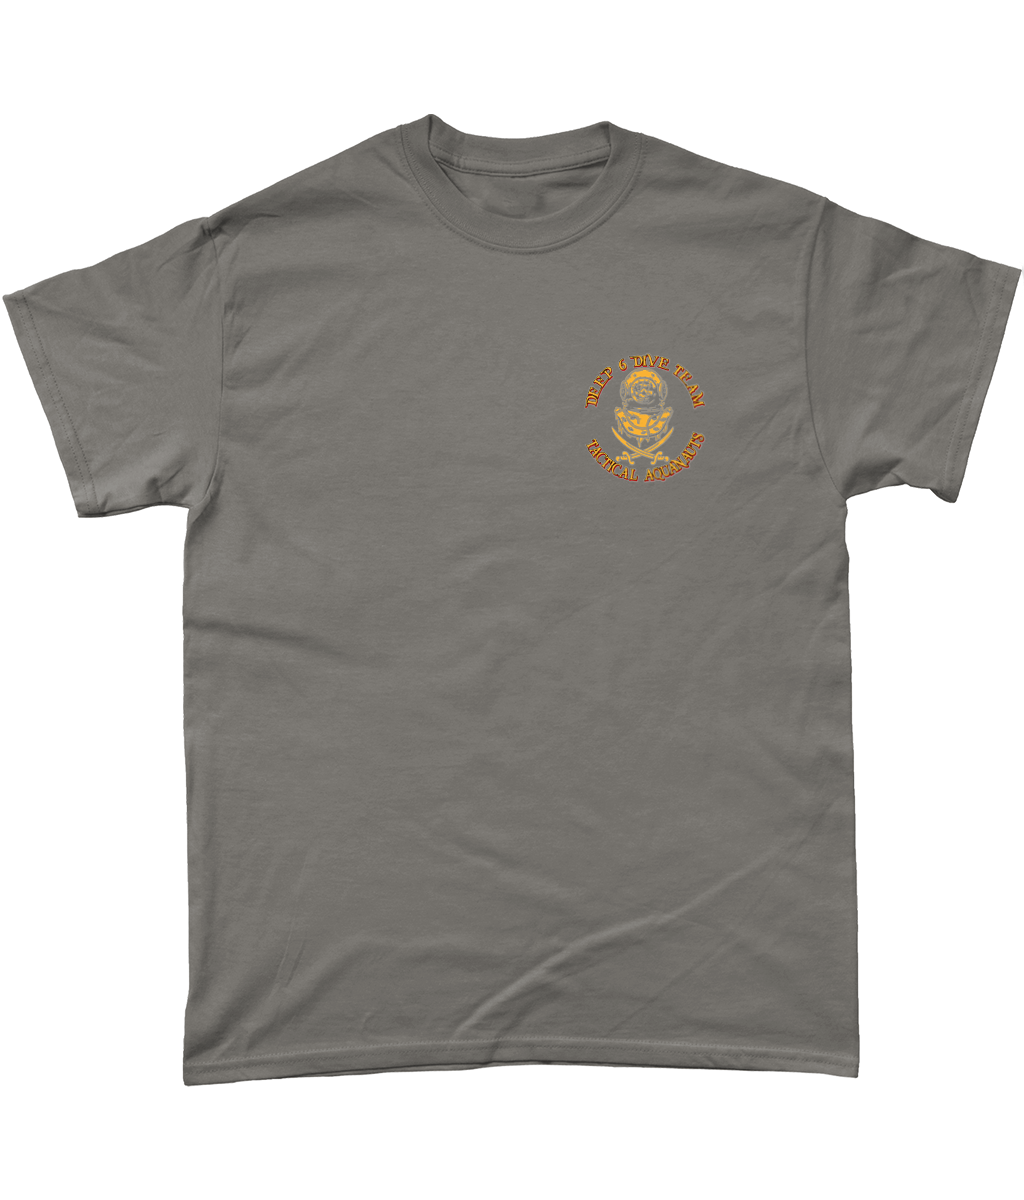 Deep 6 Dive Team - T-Shirt (02) (Printed Front and Back)